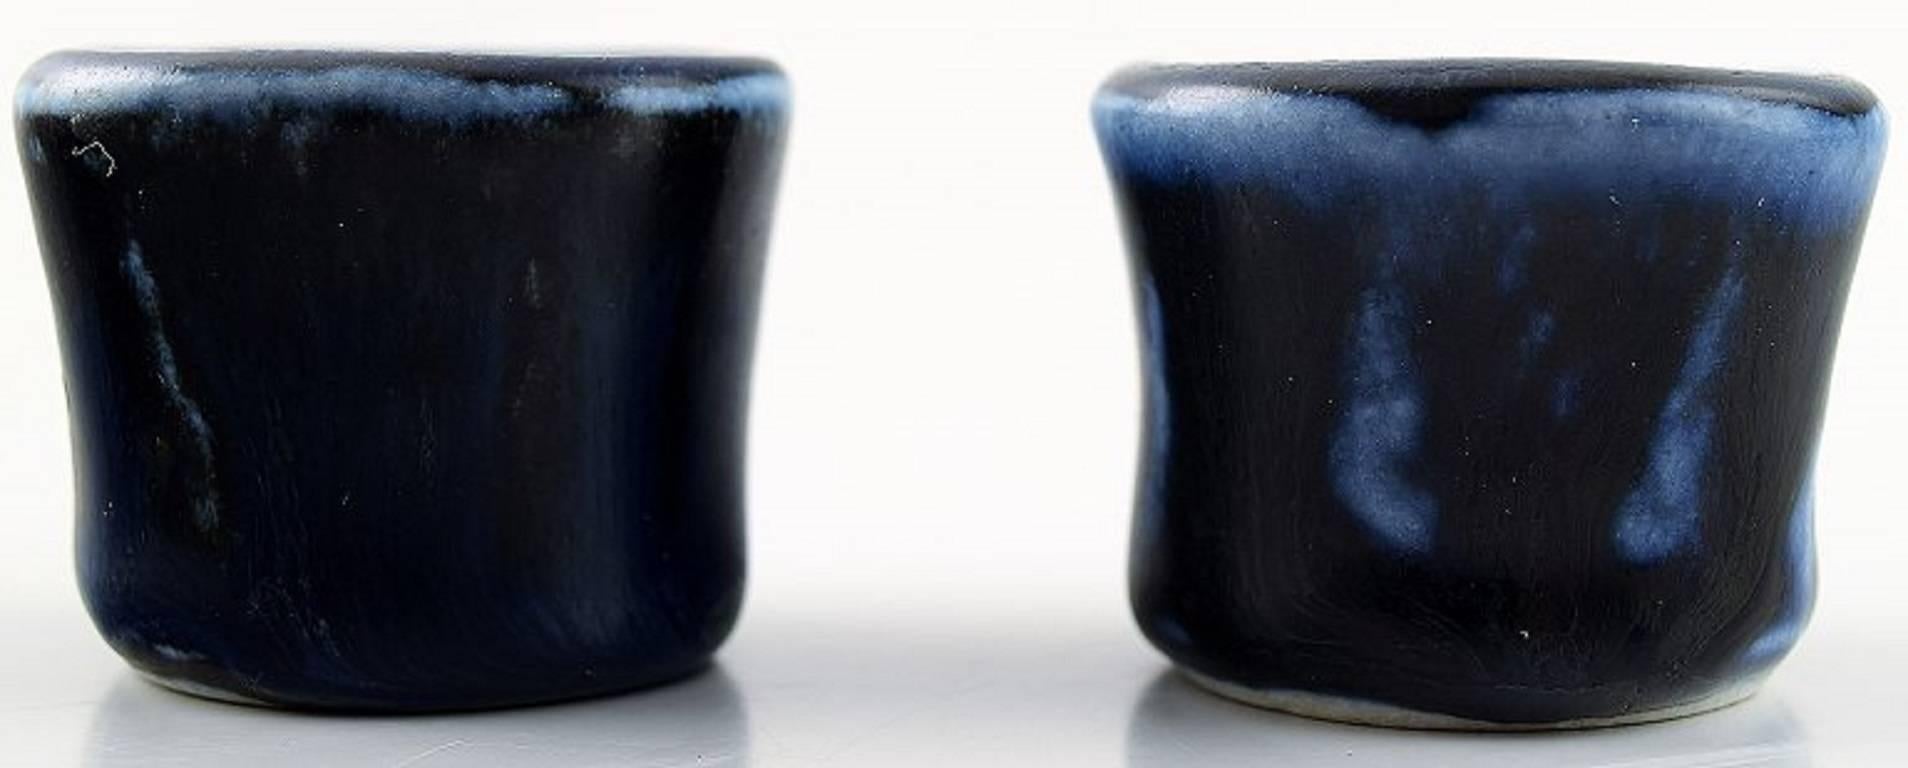 Edith Sonne for Saxbo pair of candlesticks, art pottery.

Stamped with Yin Yang, Denmark, mid-20 century.

Glaze in dark blue shades.

Measures 3.3 cm.

In perfect condition.